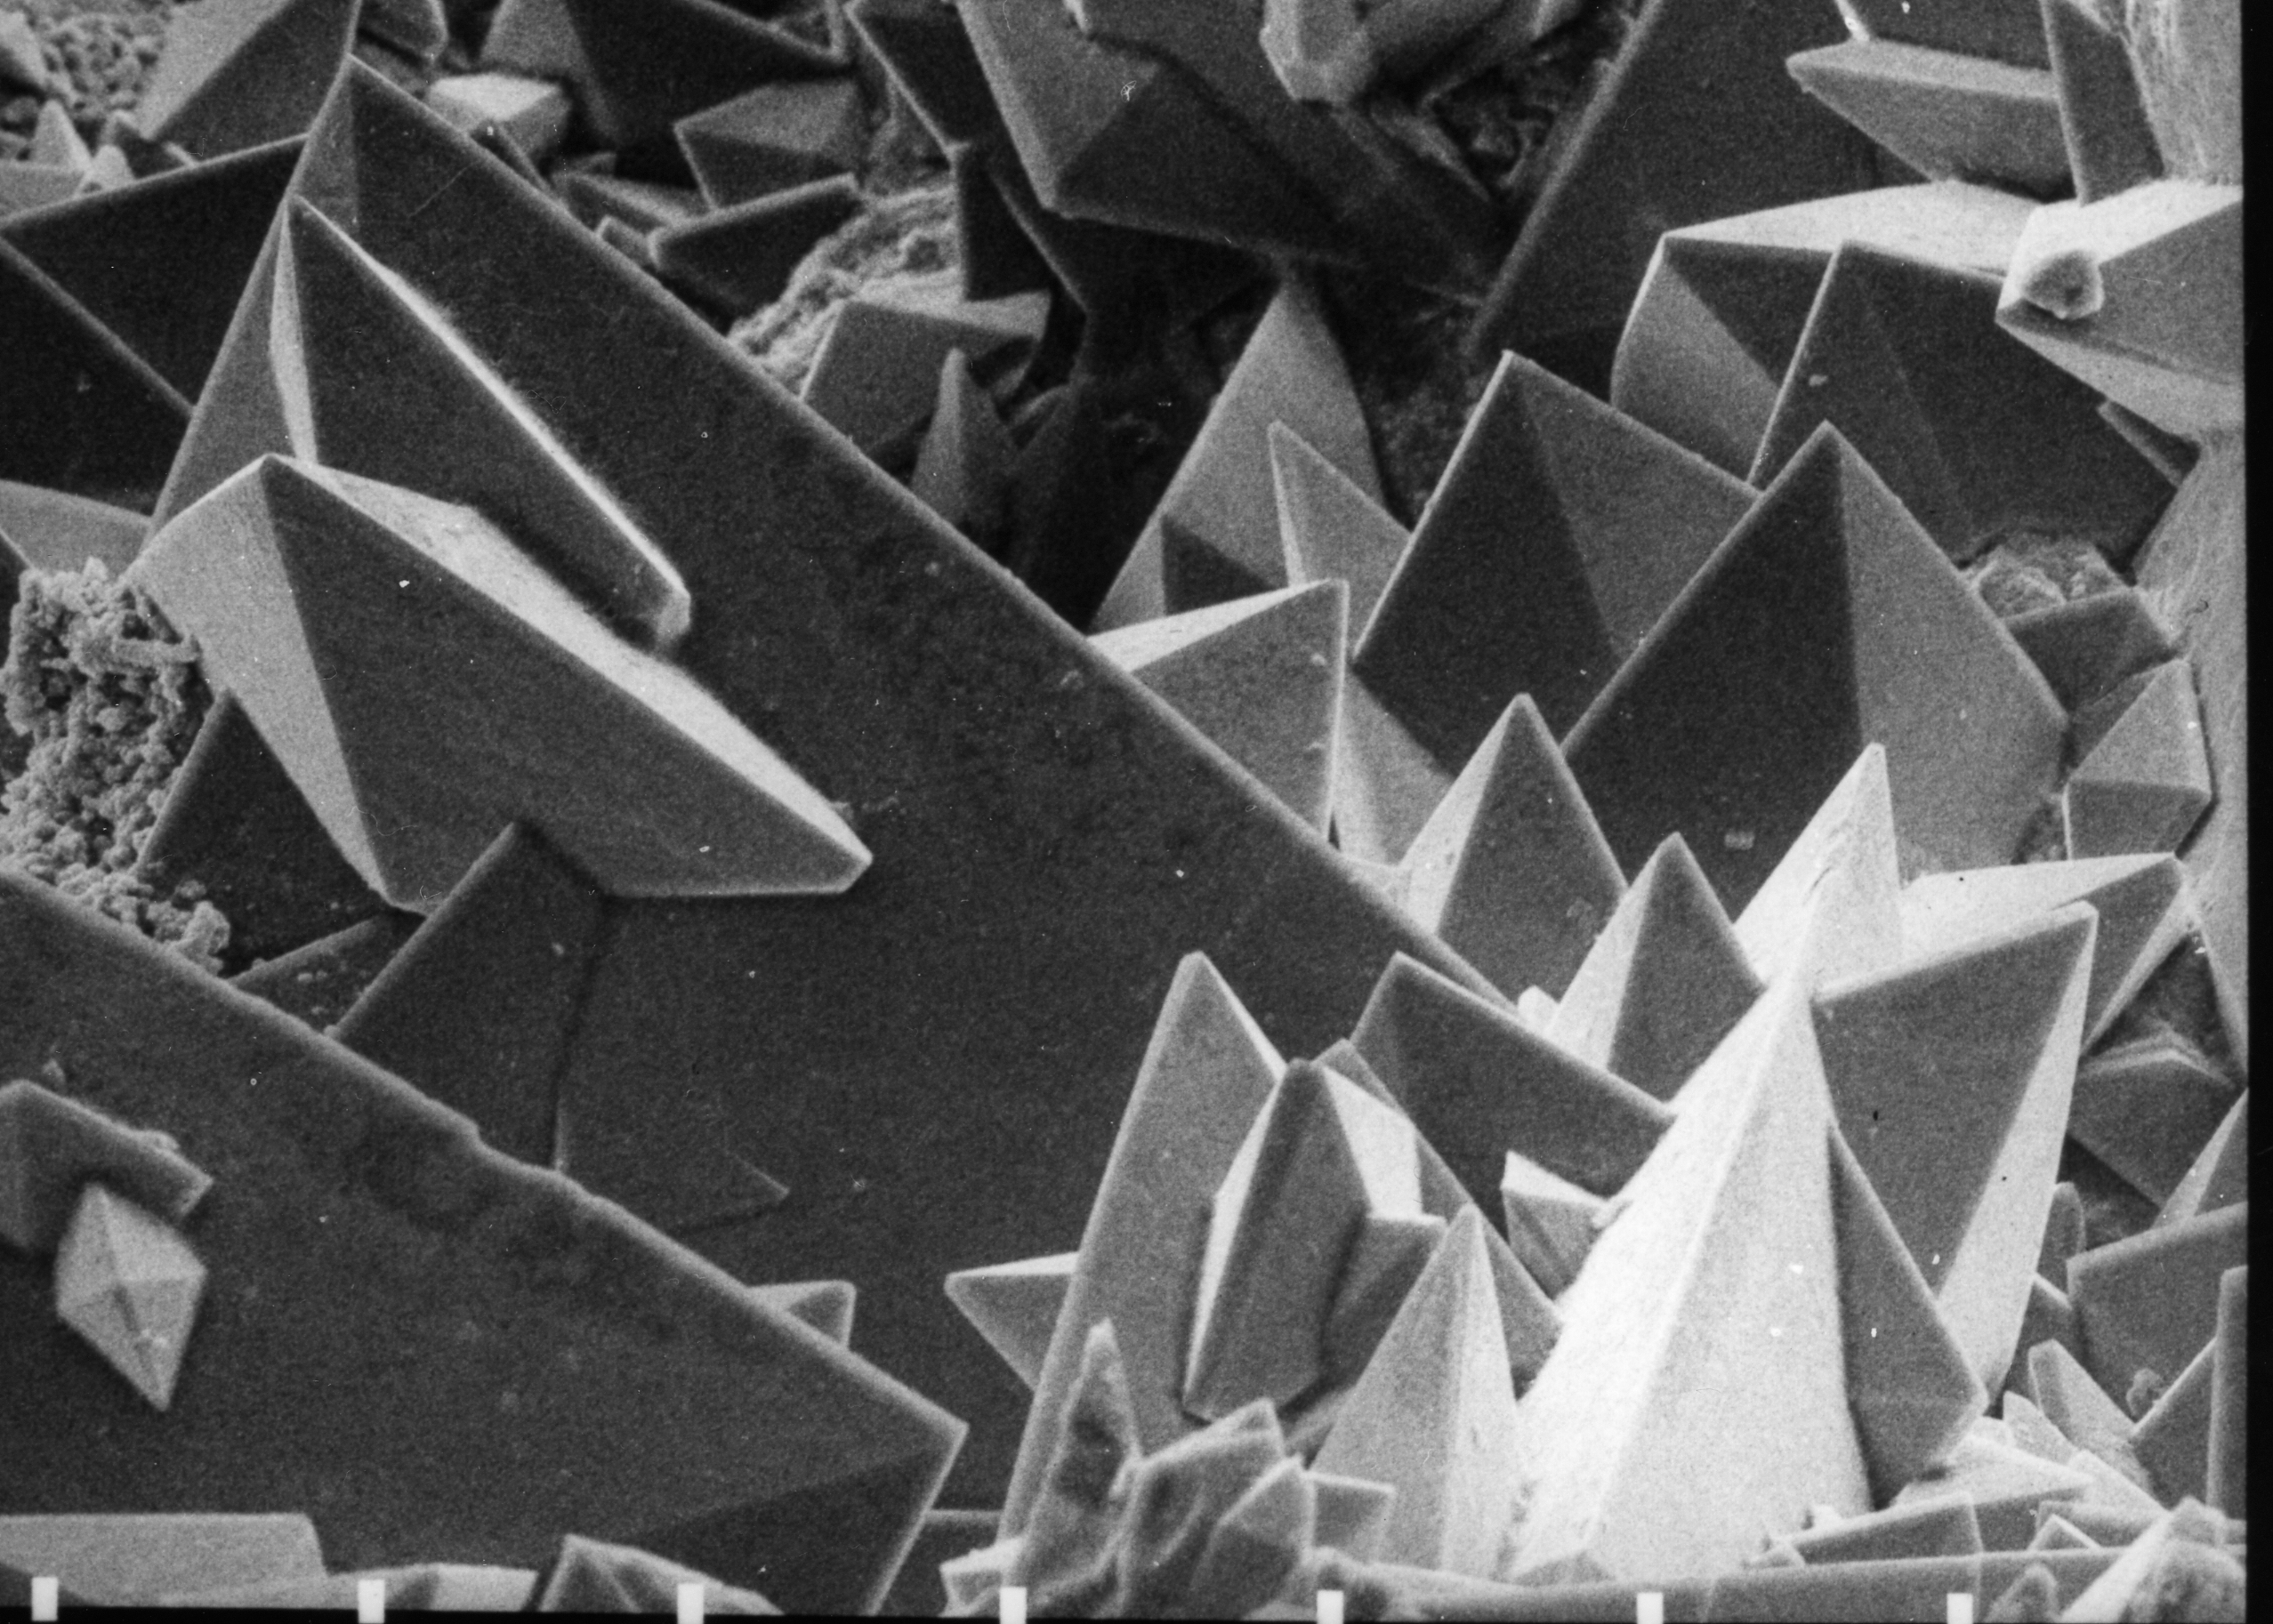 Calcium oxalate dihydrate crystals under Scanning Electron Micrograph (SEM) taken at 30 KV. Source: Wikimedia commons[16]